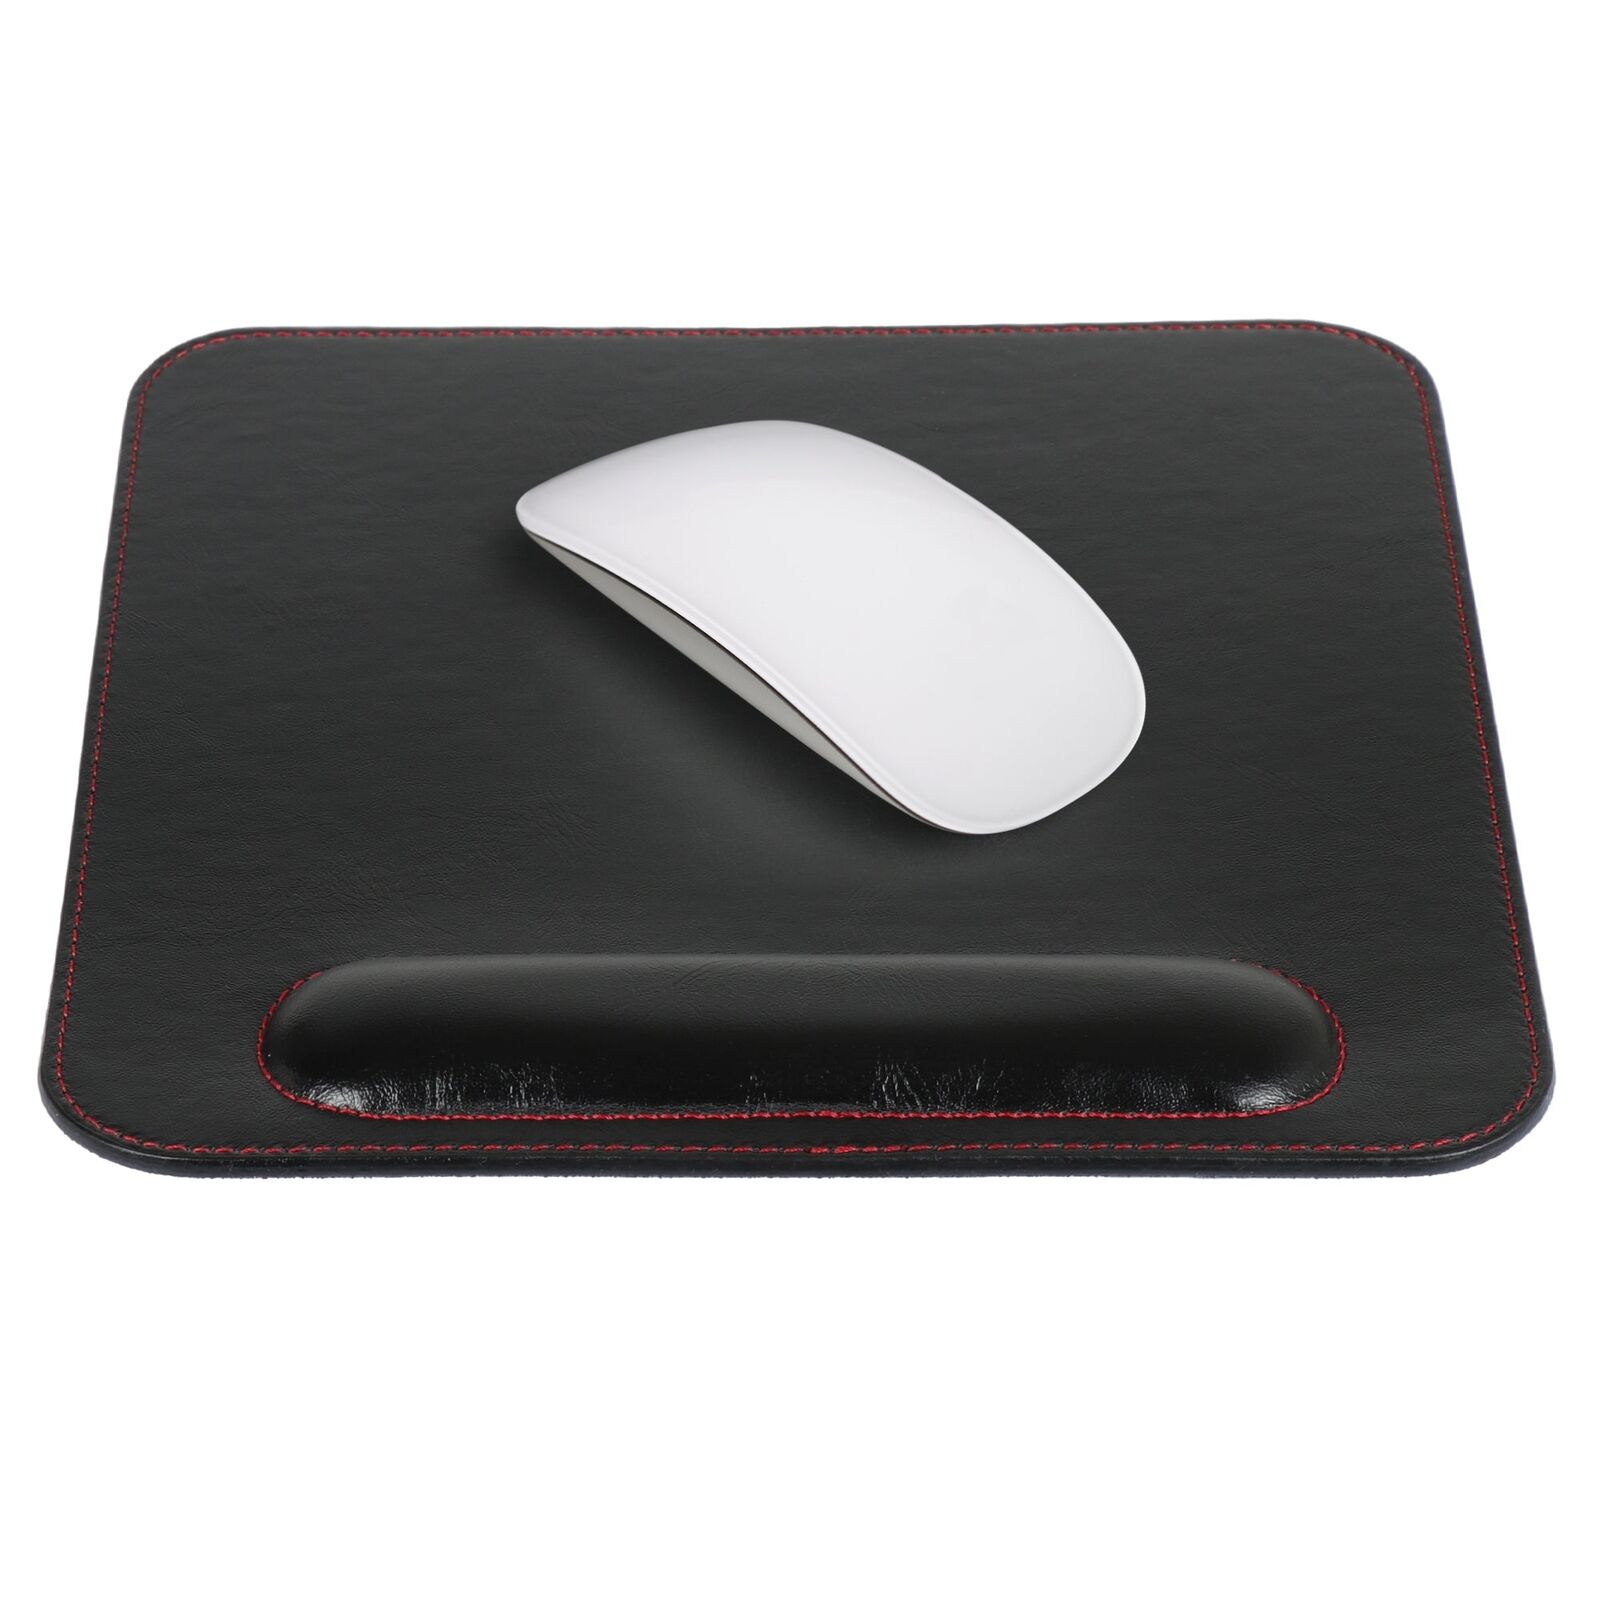 Personalized Leather Mouse Pad with Wrist Rest, Synthetic Leather Mousepad